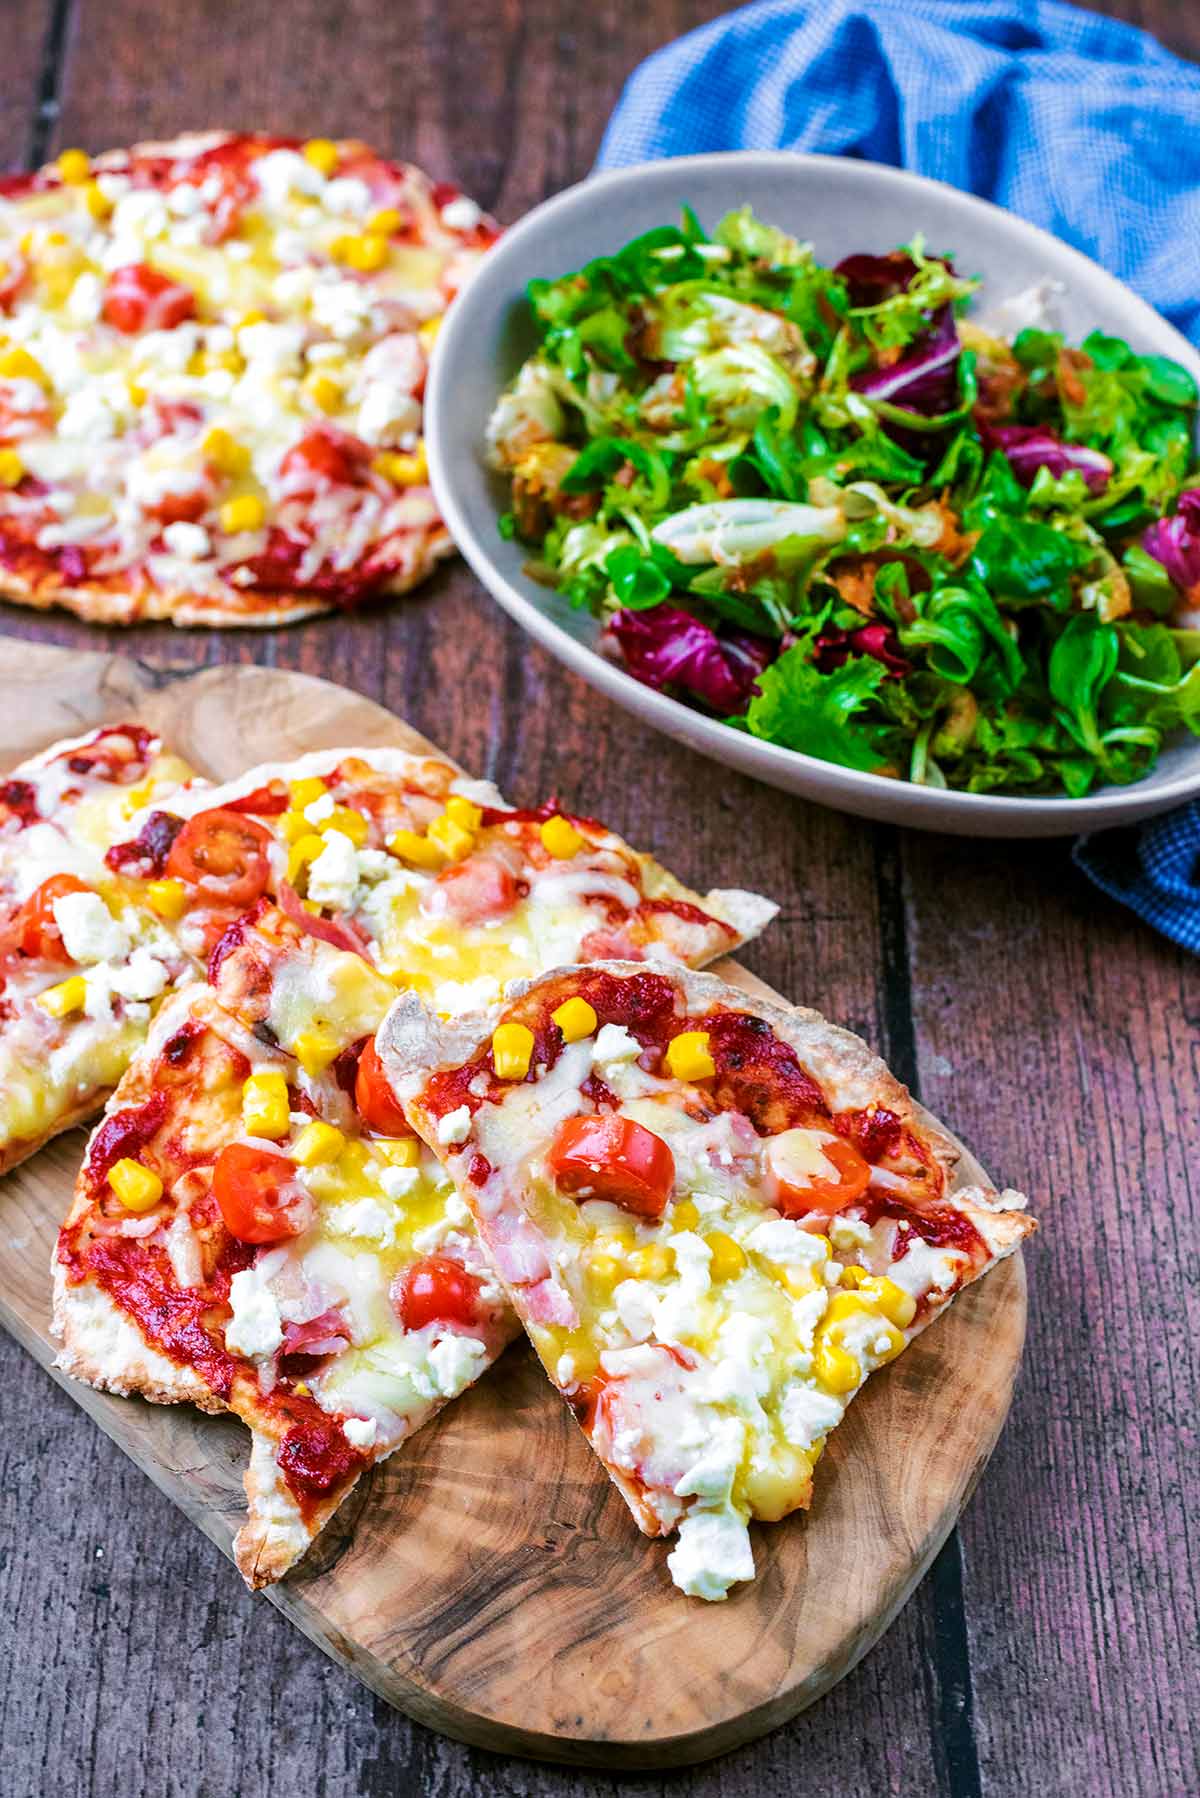 Slices of pizza in front of a whole pizza and some salad.